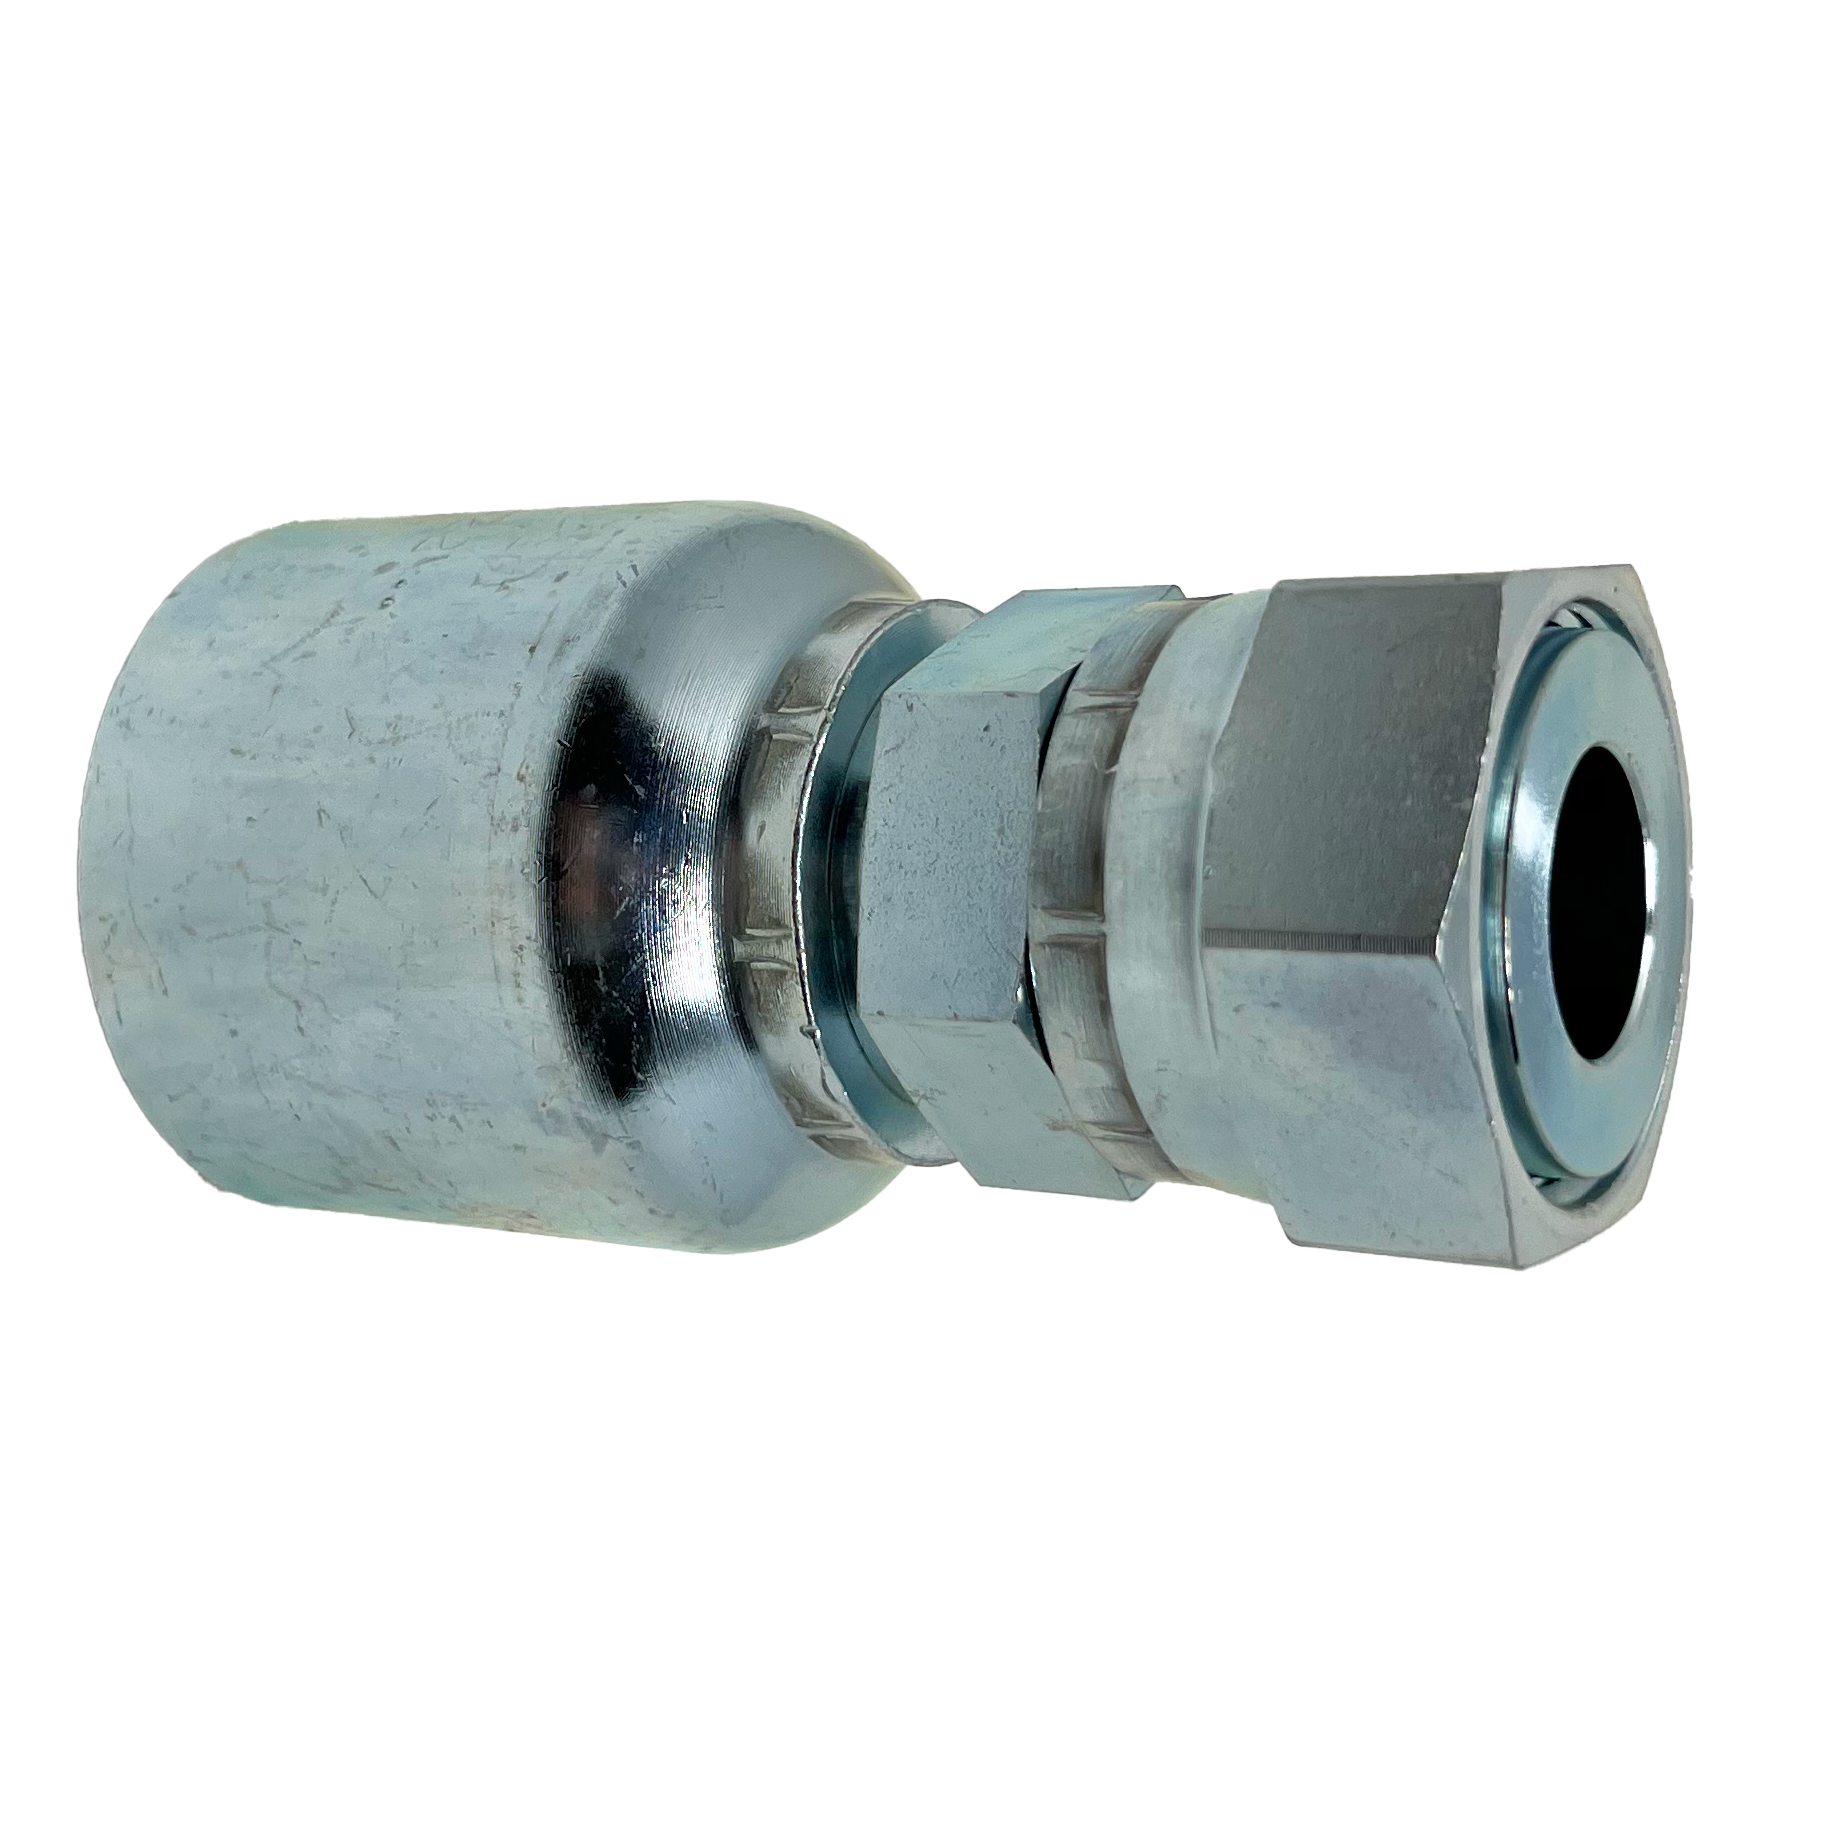 B2-OFFX-1612: Continental Hose Fitting, 1" Hose ID x 1-3/16-12 Female ORFS, Straight Swivel Connection